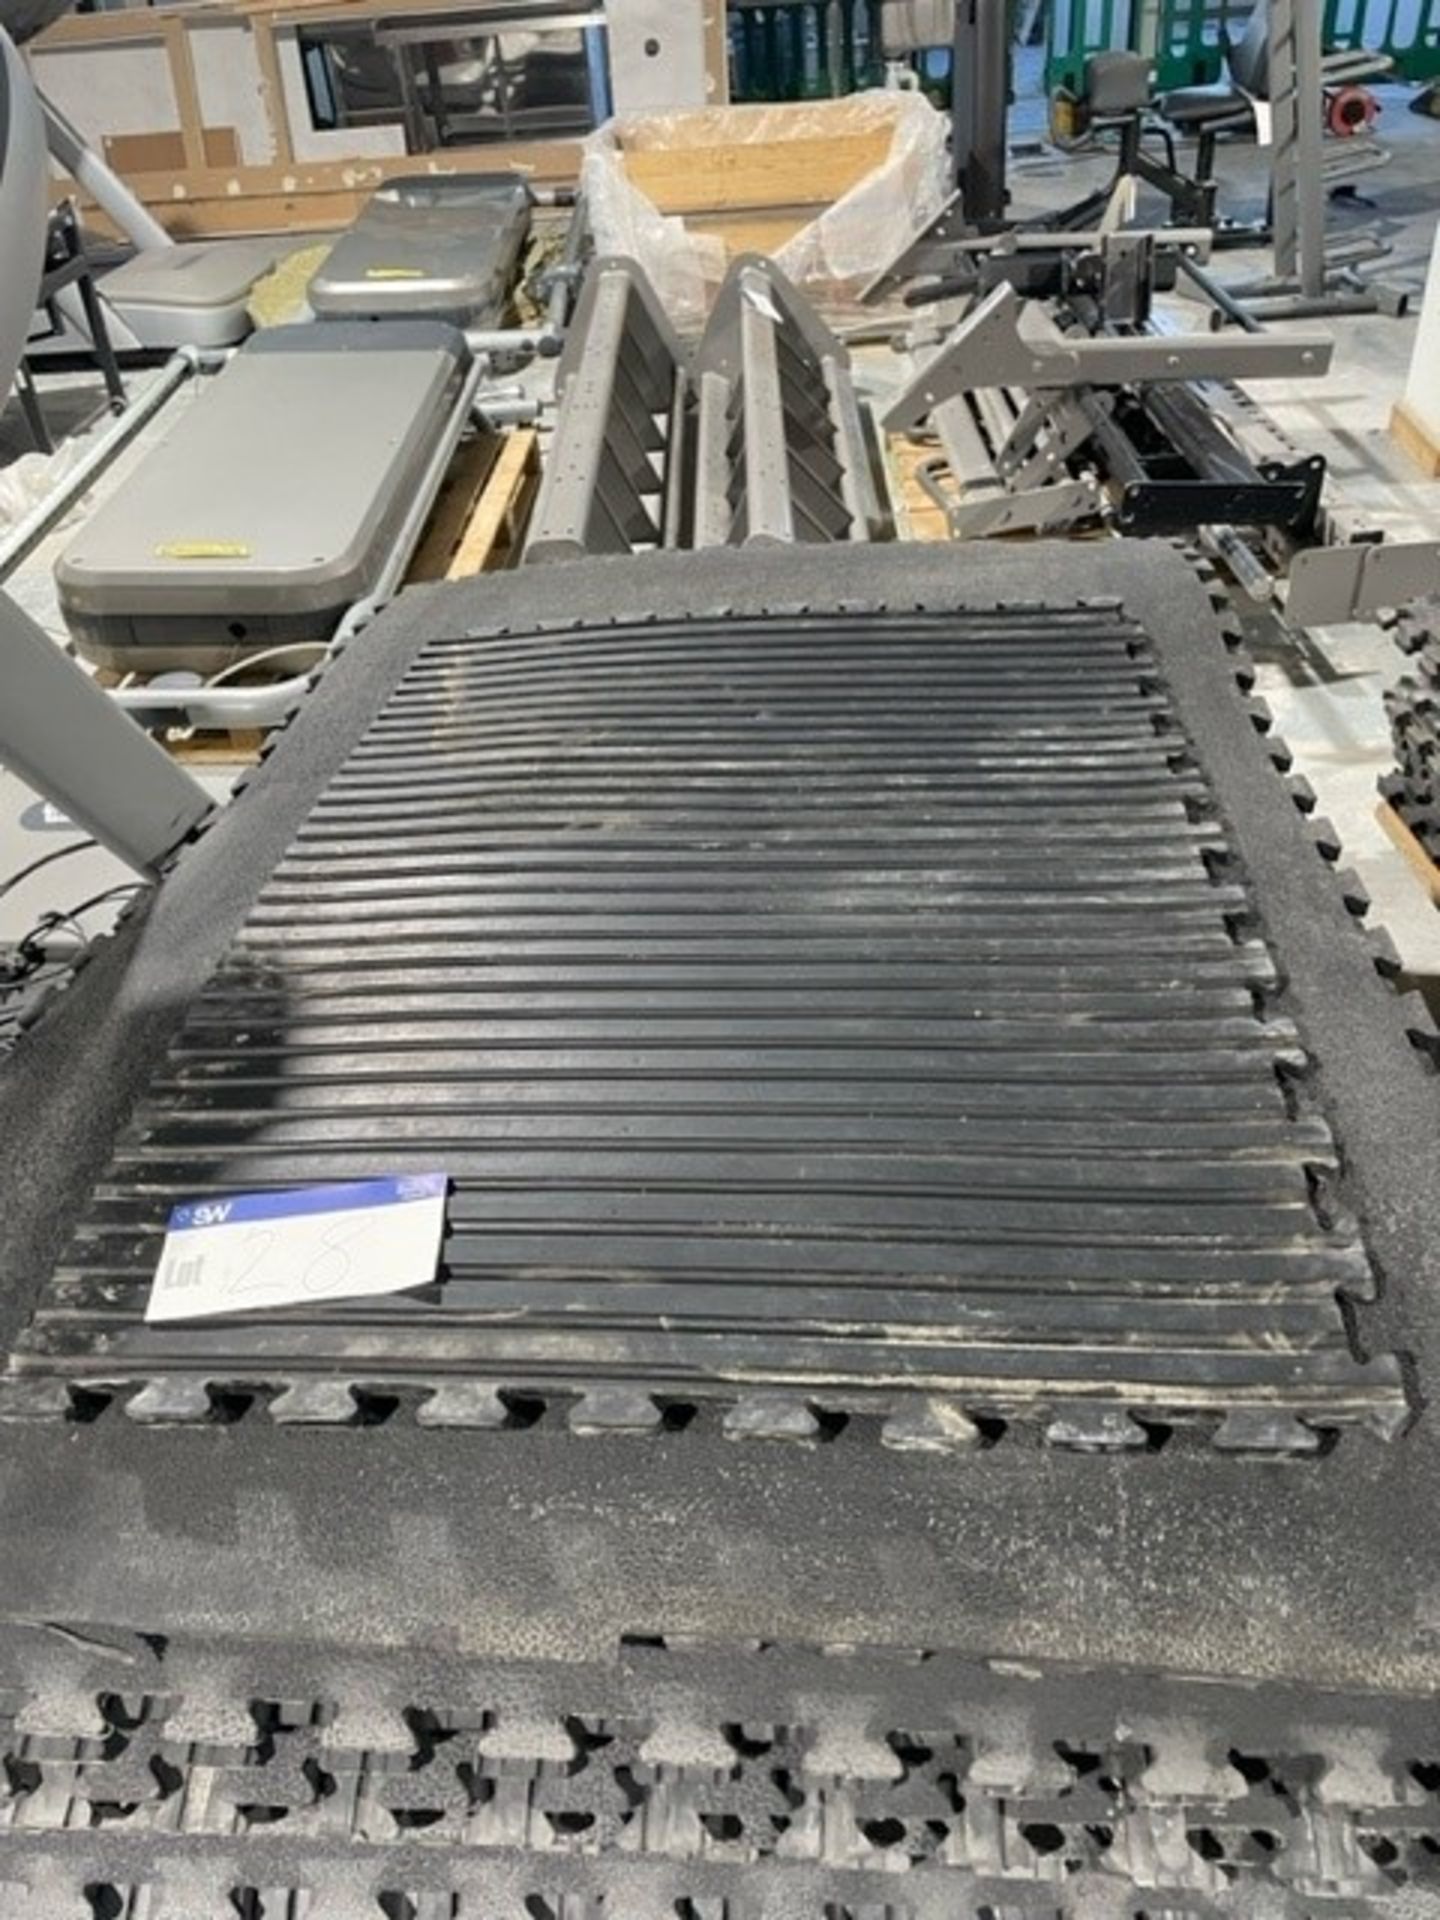 Approx. 20 Rubber Connecting Floor Mats, Approx. 1.2m x 2m Please read the following important